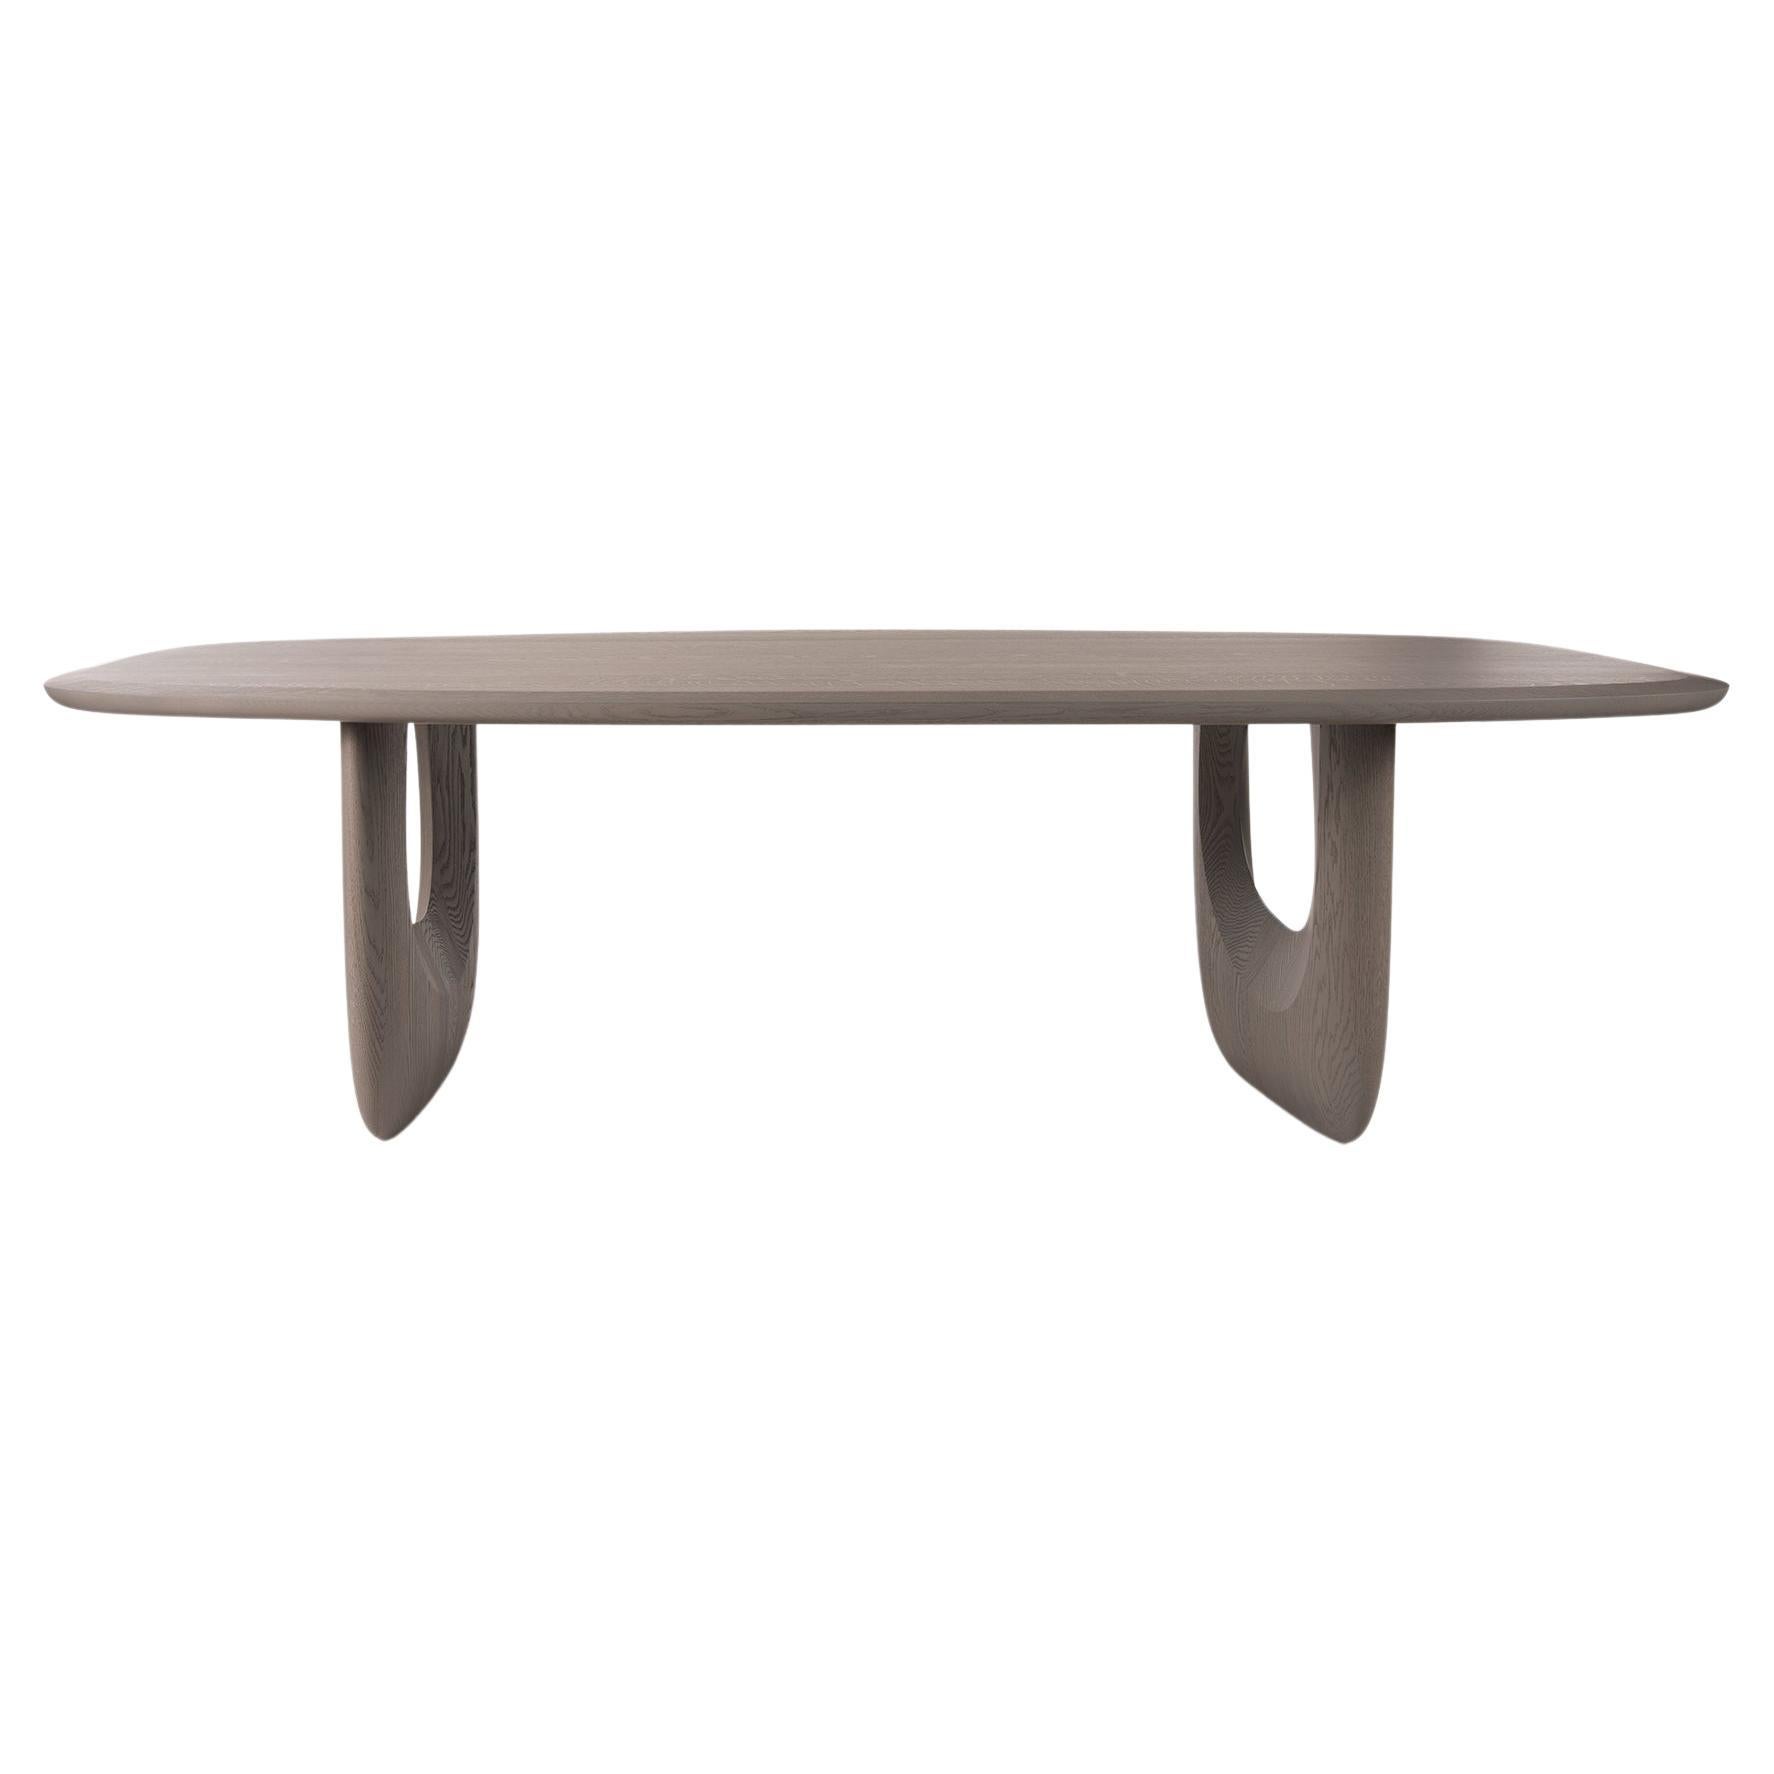 Dining Table 'Savignyplatz' by Man of Parts, Nude Oak, 260 cm For Sale 4